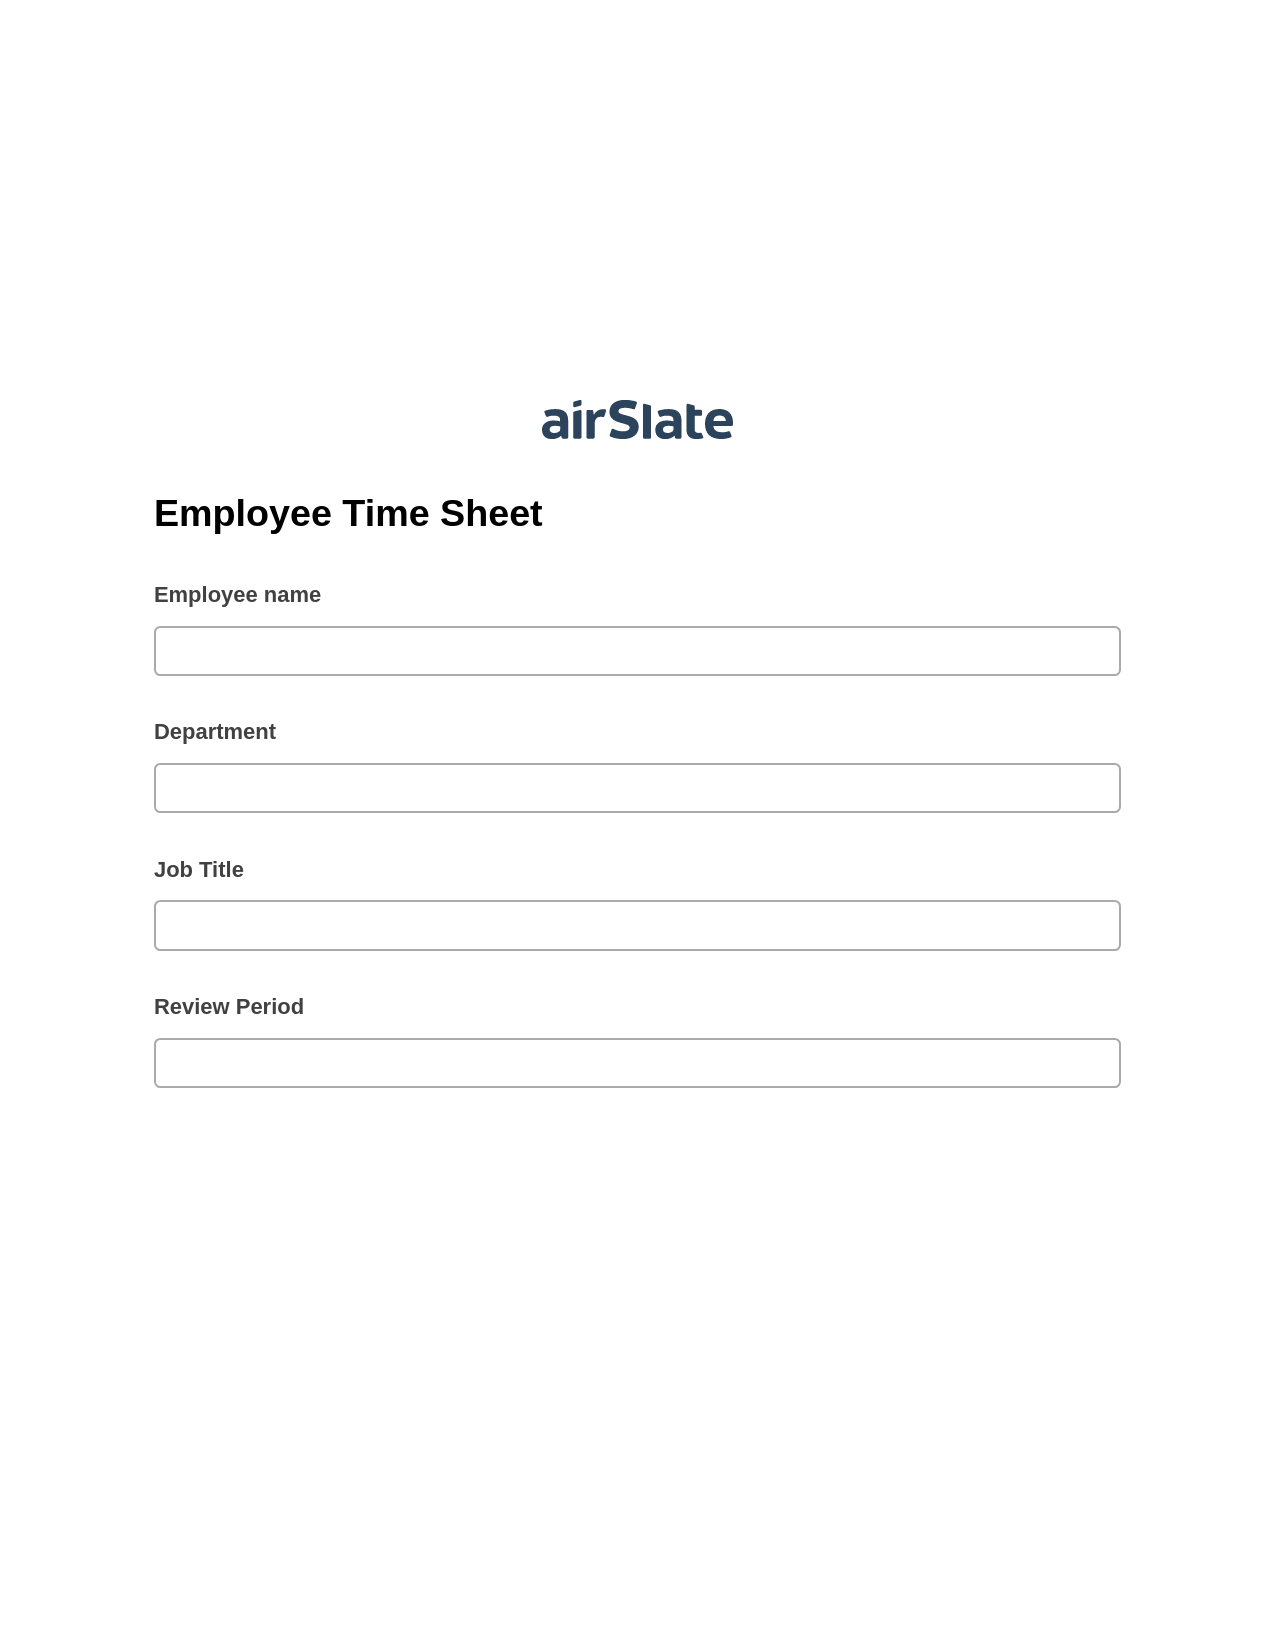 Employee Time Sheet Pre-fill from MySQL Bot, Create slate from another Flow Bot, Export to WebMerge Bot